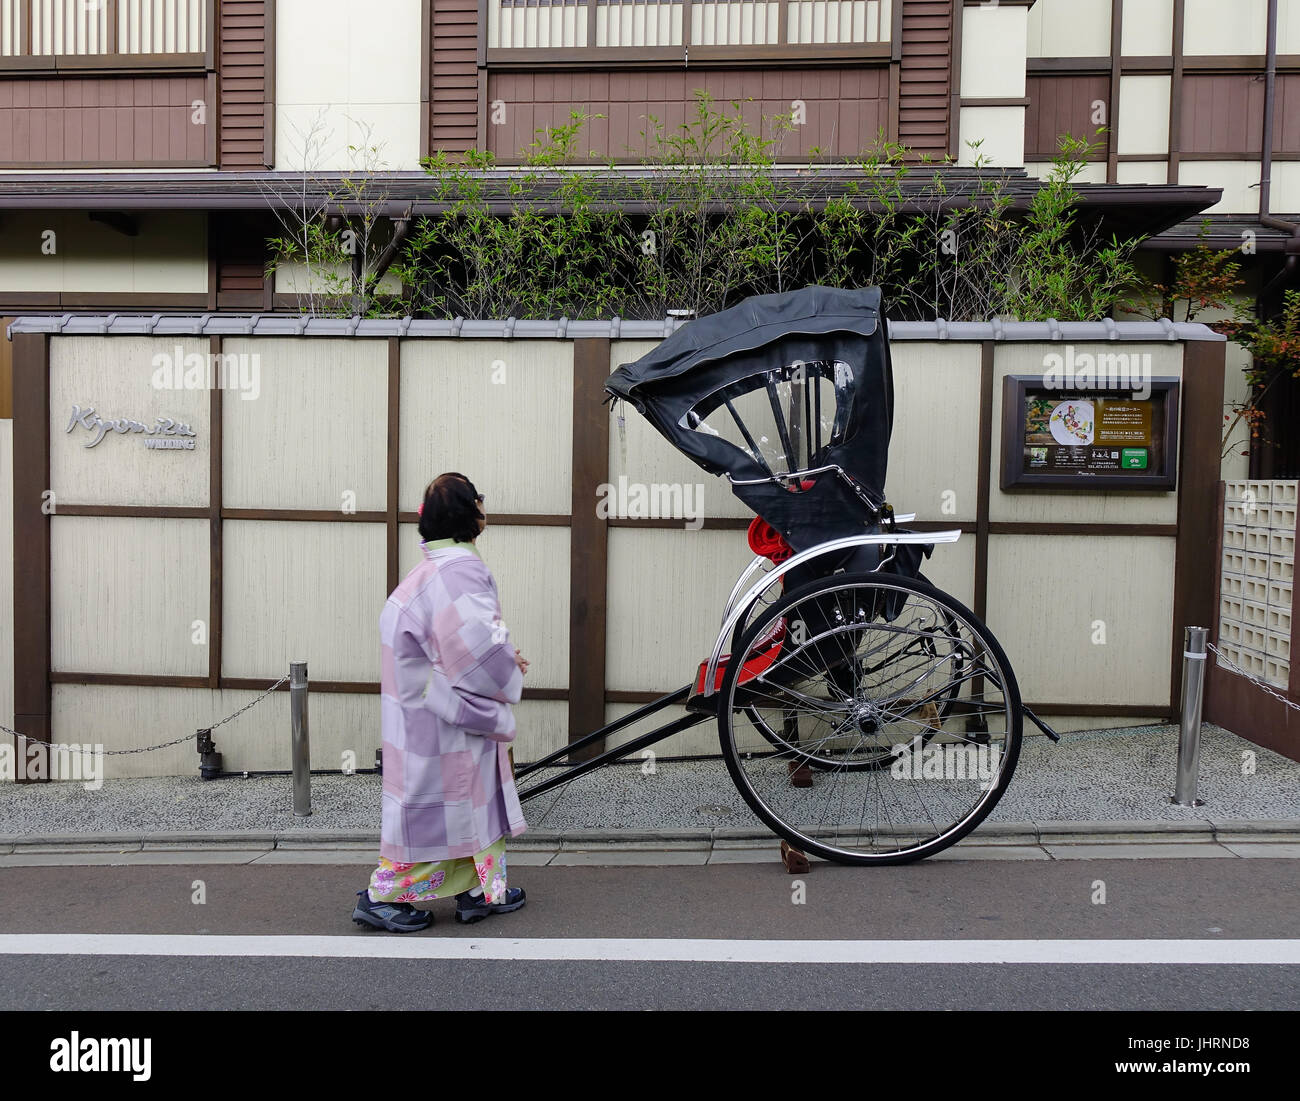 Kyoto, Japan - Nov 29, 2016. A rickshaw on street at old town in Kyoto, Japan. Kyoto was the capital of Japan for over a millennium, and carries a rep Stock Photo